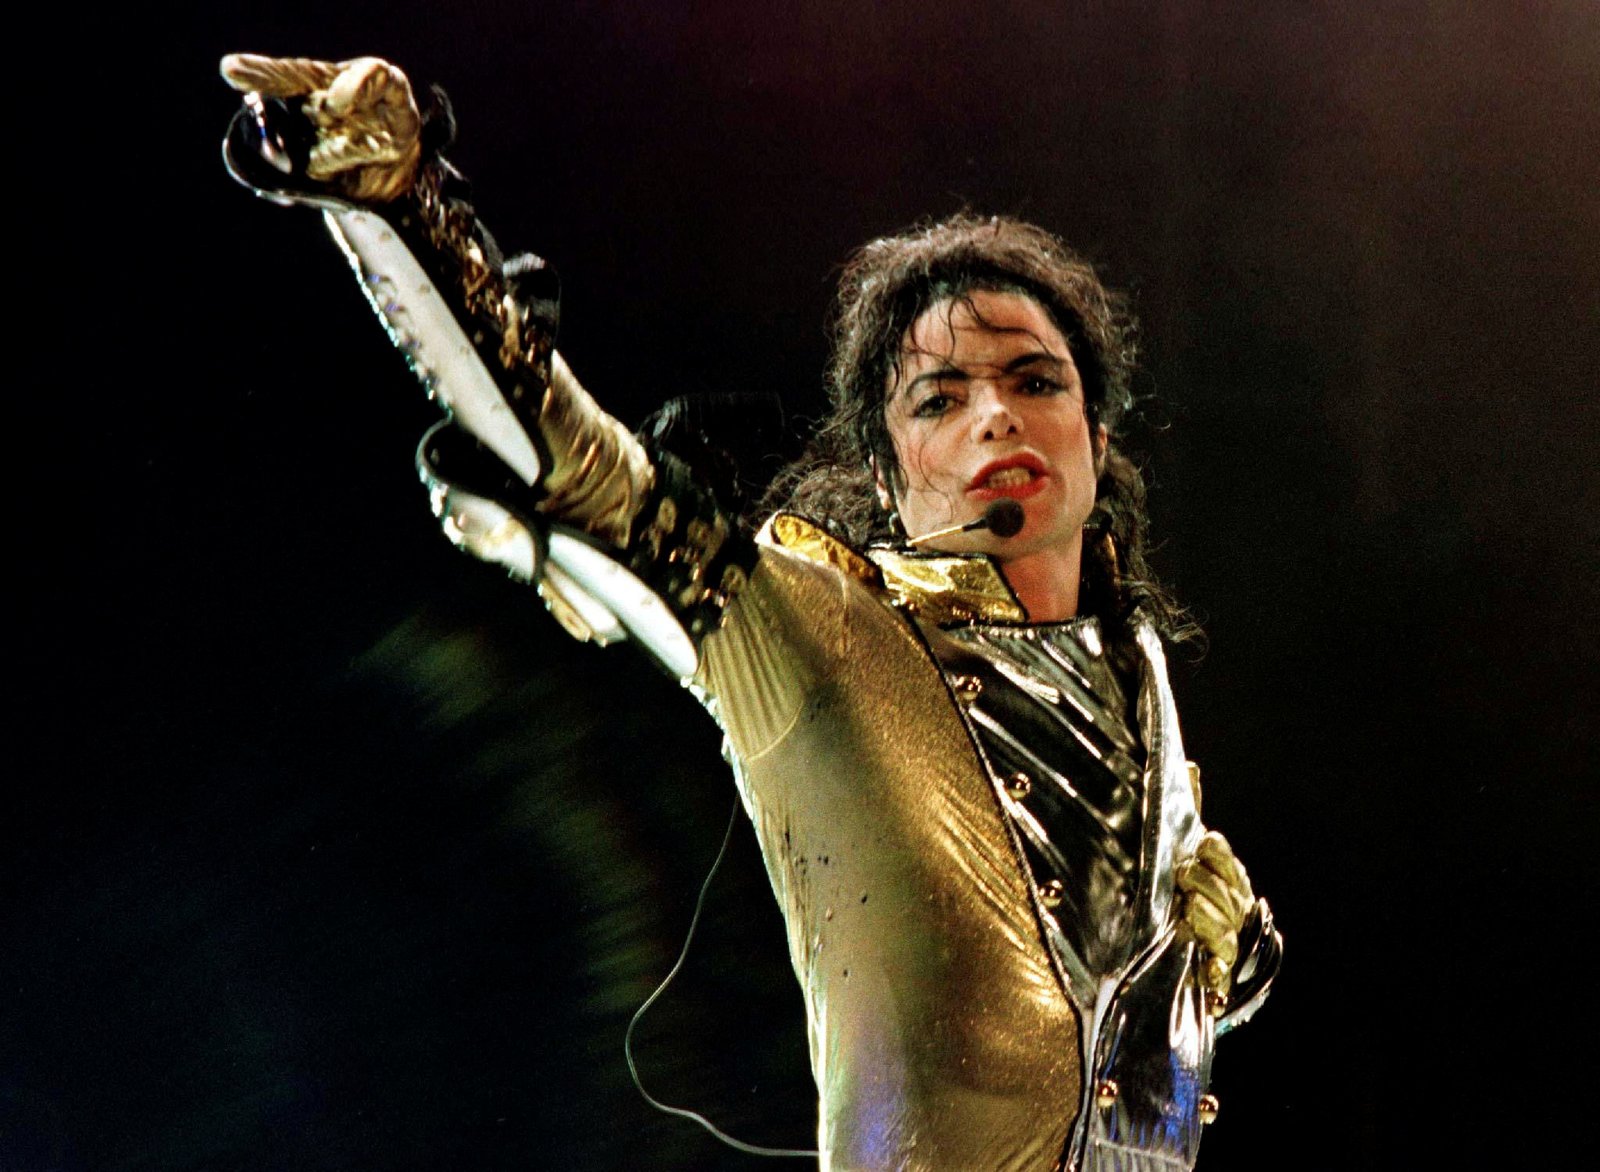 Michael Jackson's biopic "Michael" is set for global release